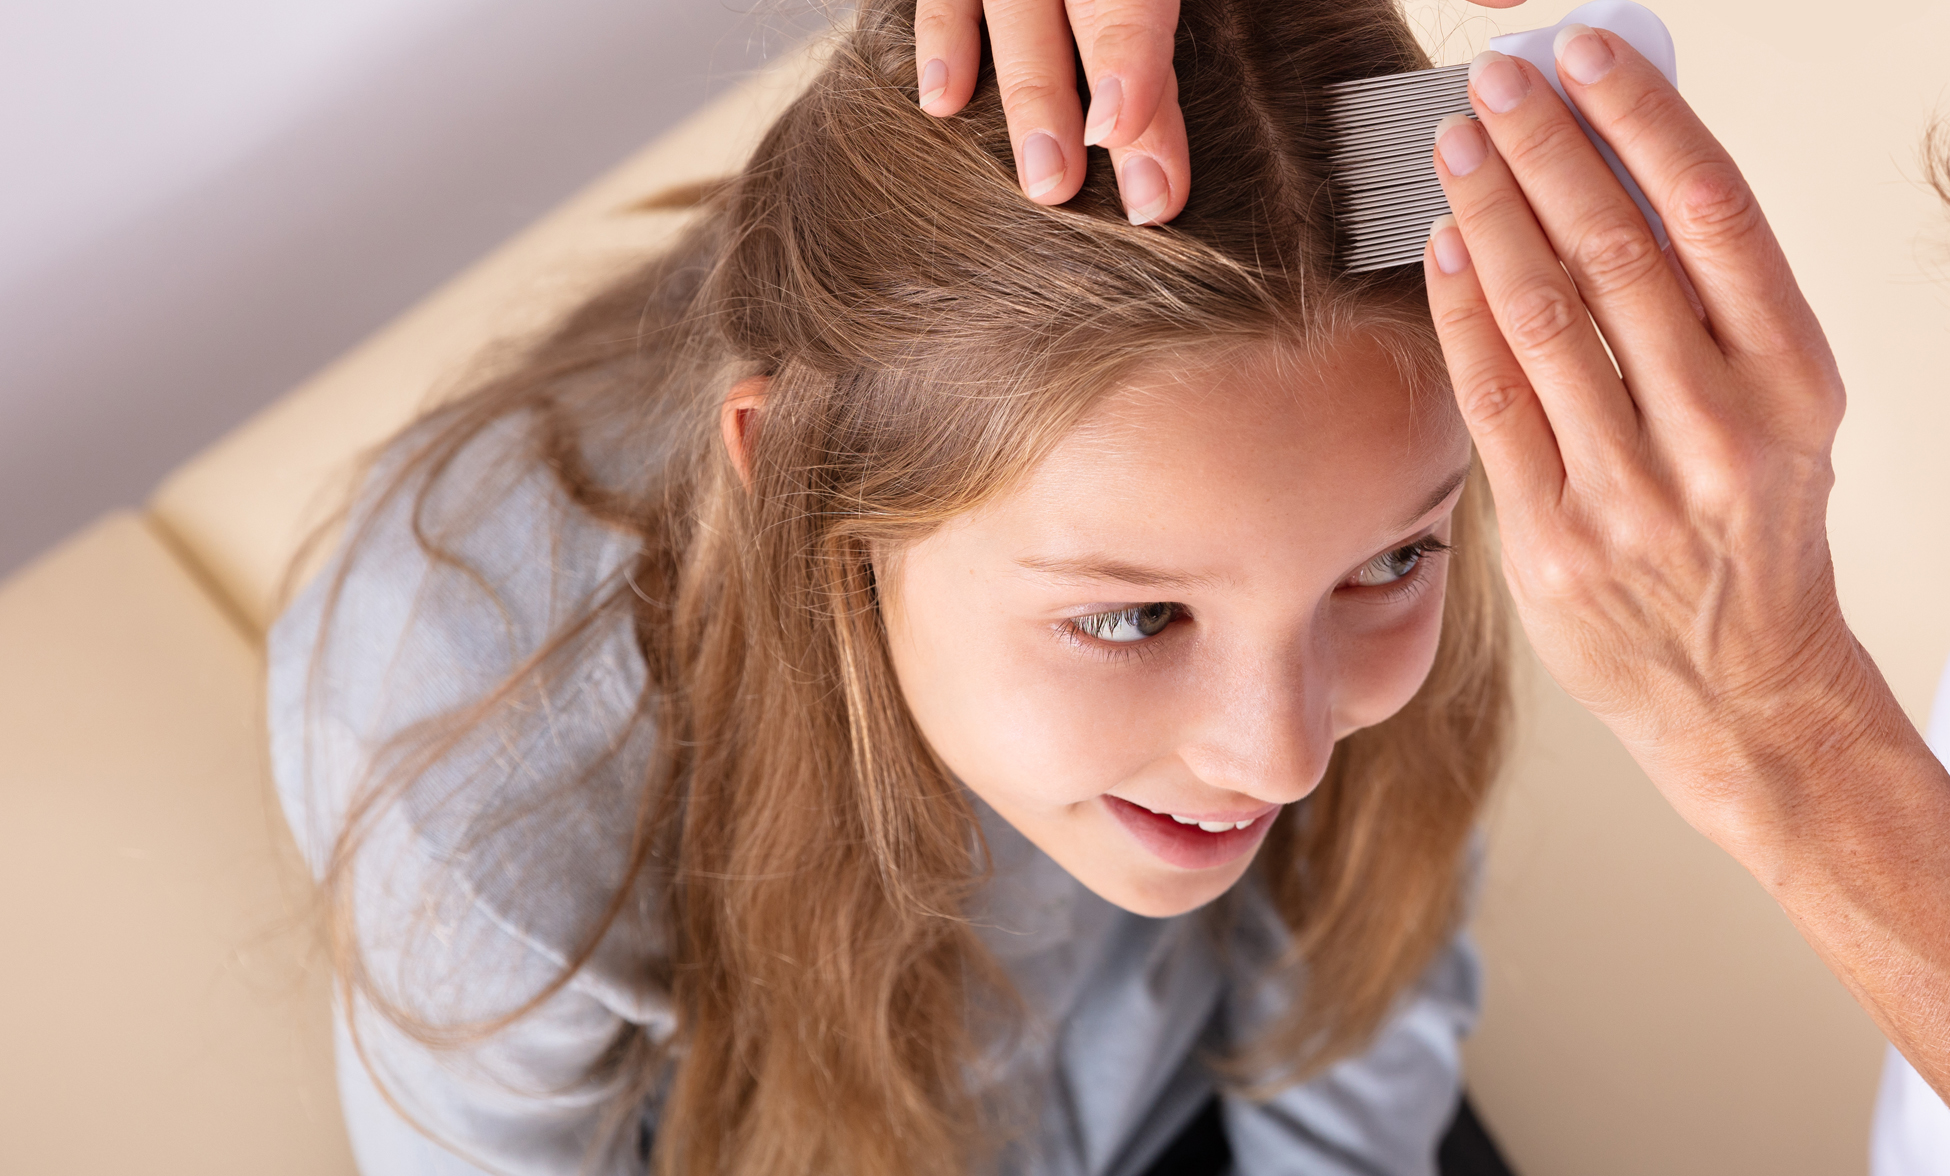 South Florida Lice Treatment Experts